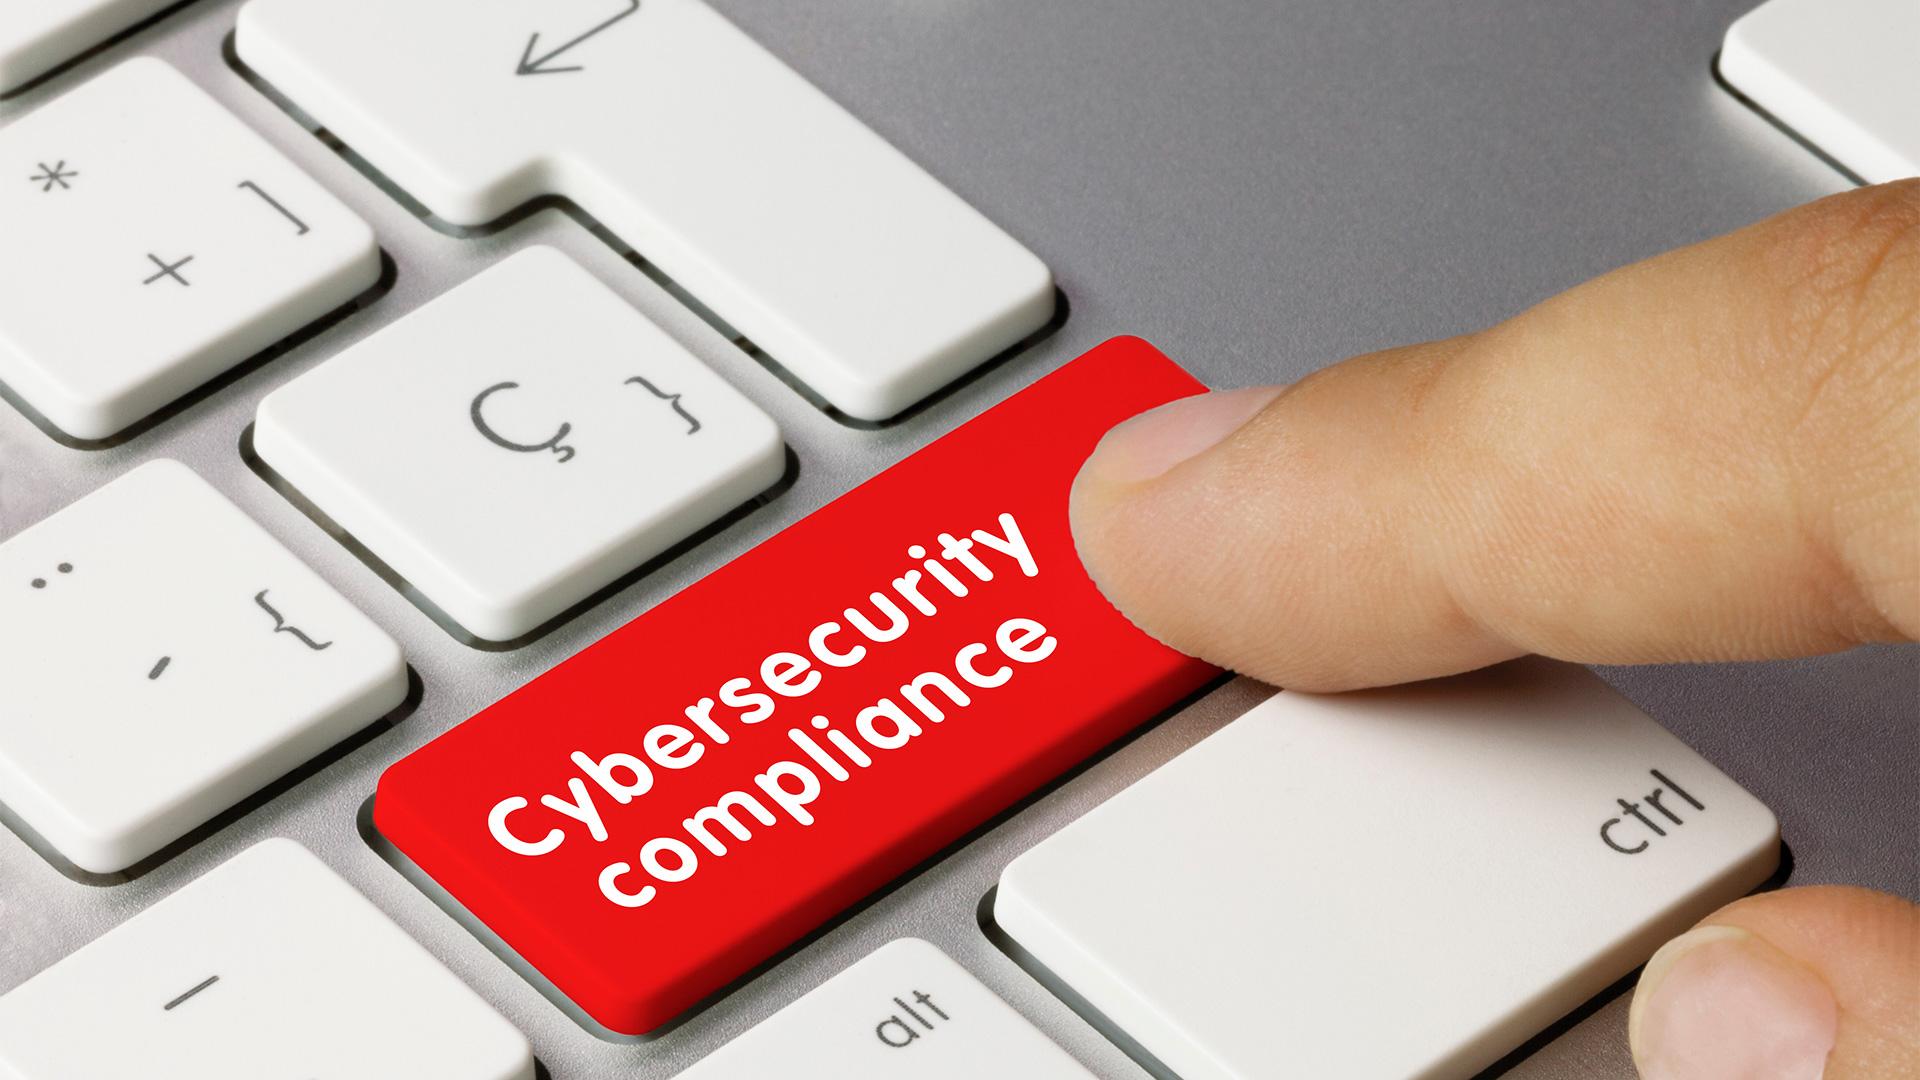 Hand pressing red button on keyboard labeled "cybersecurity compliance"